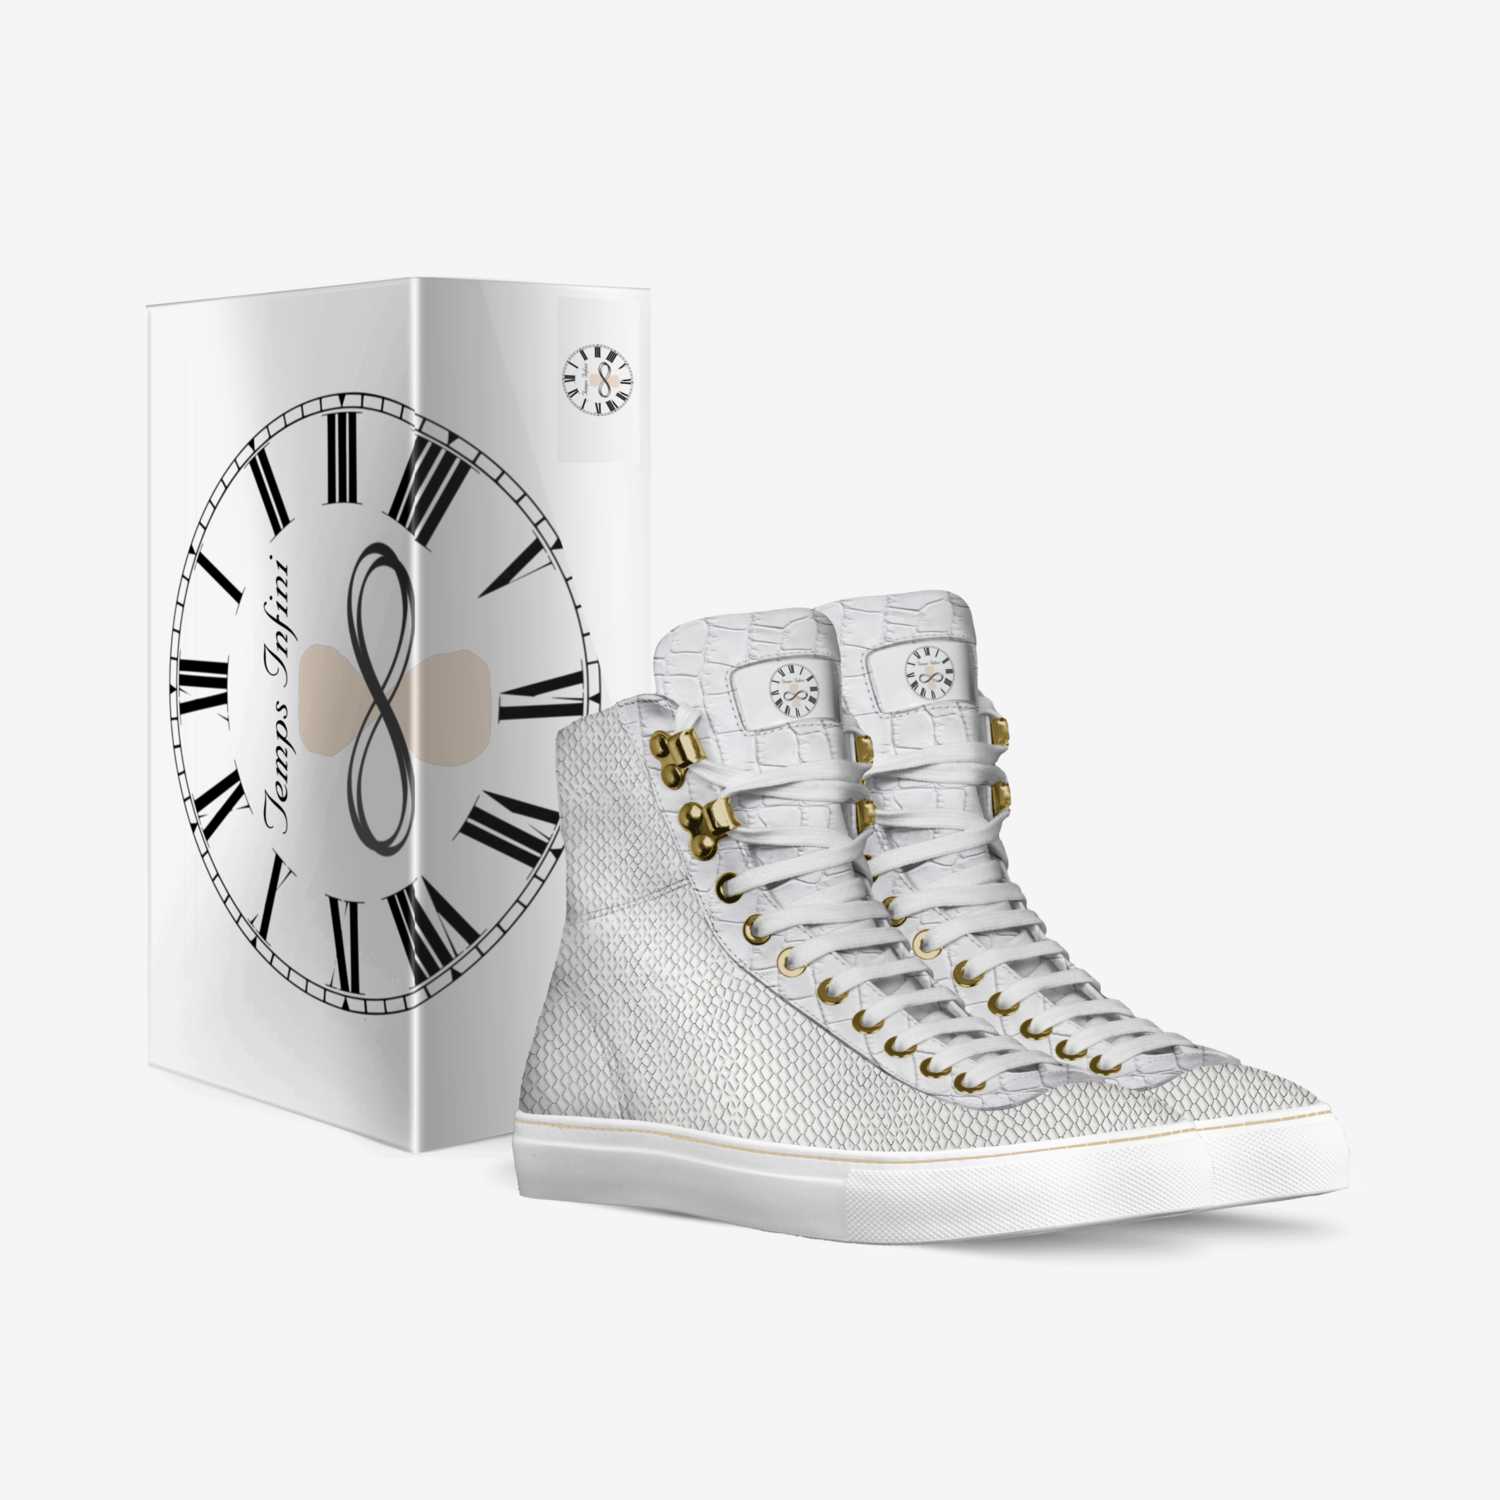 T.i.WhiteSnake custom made in Italy shoes by Jermaine Gumbs | Box view